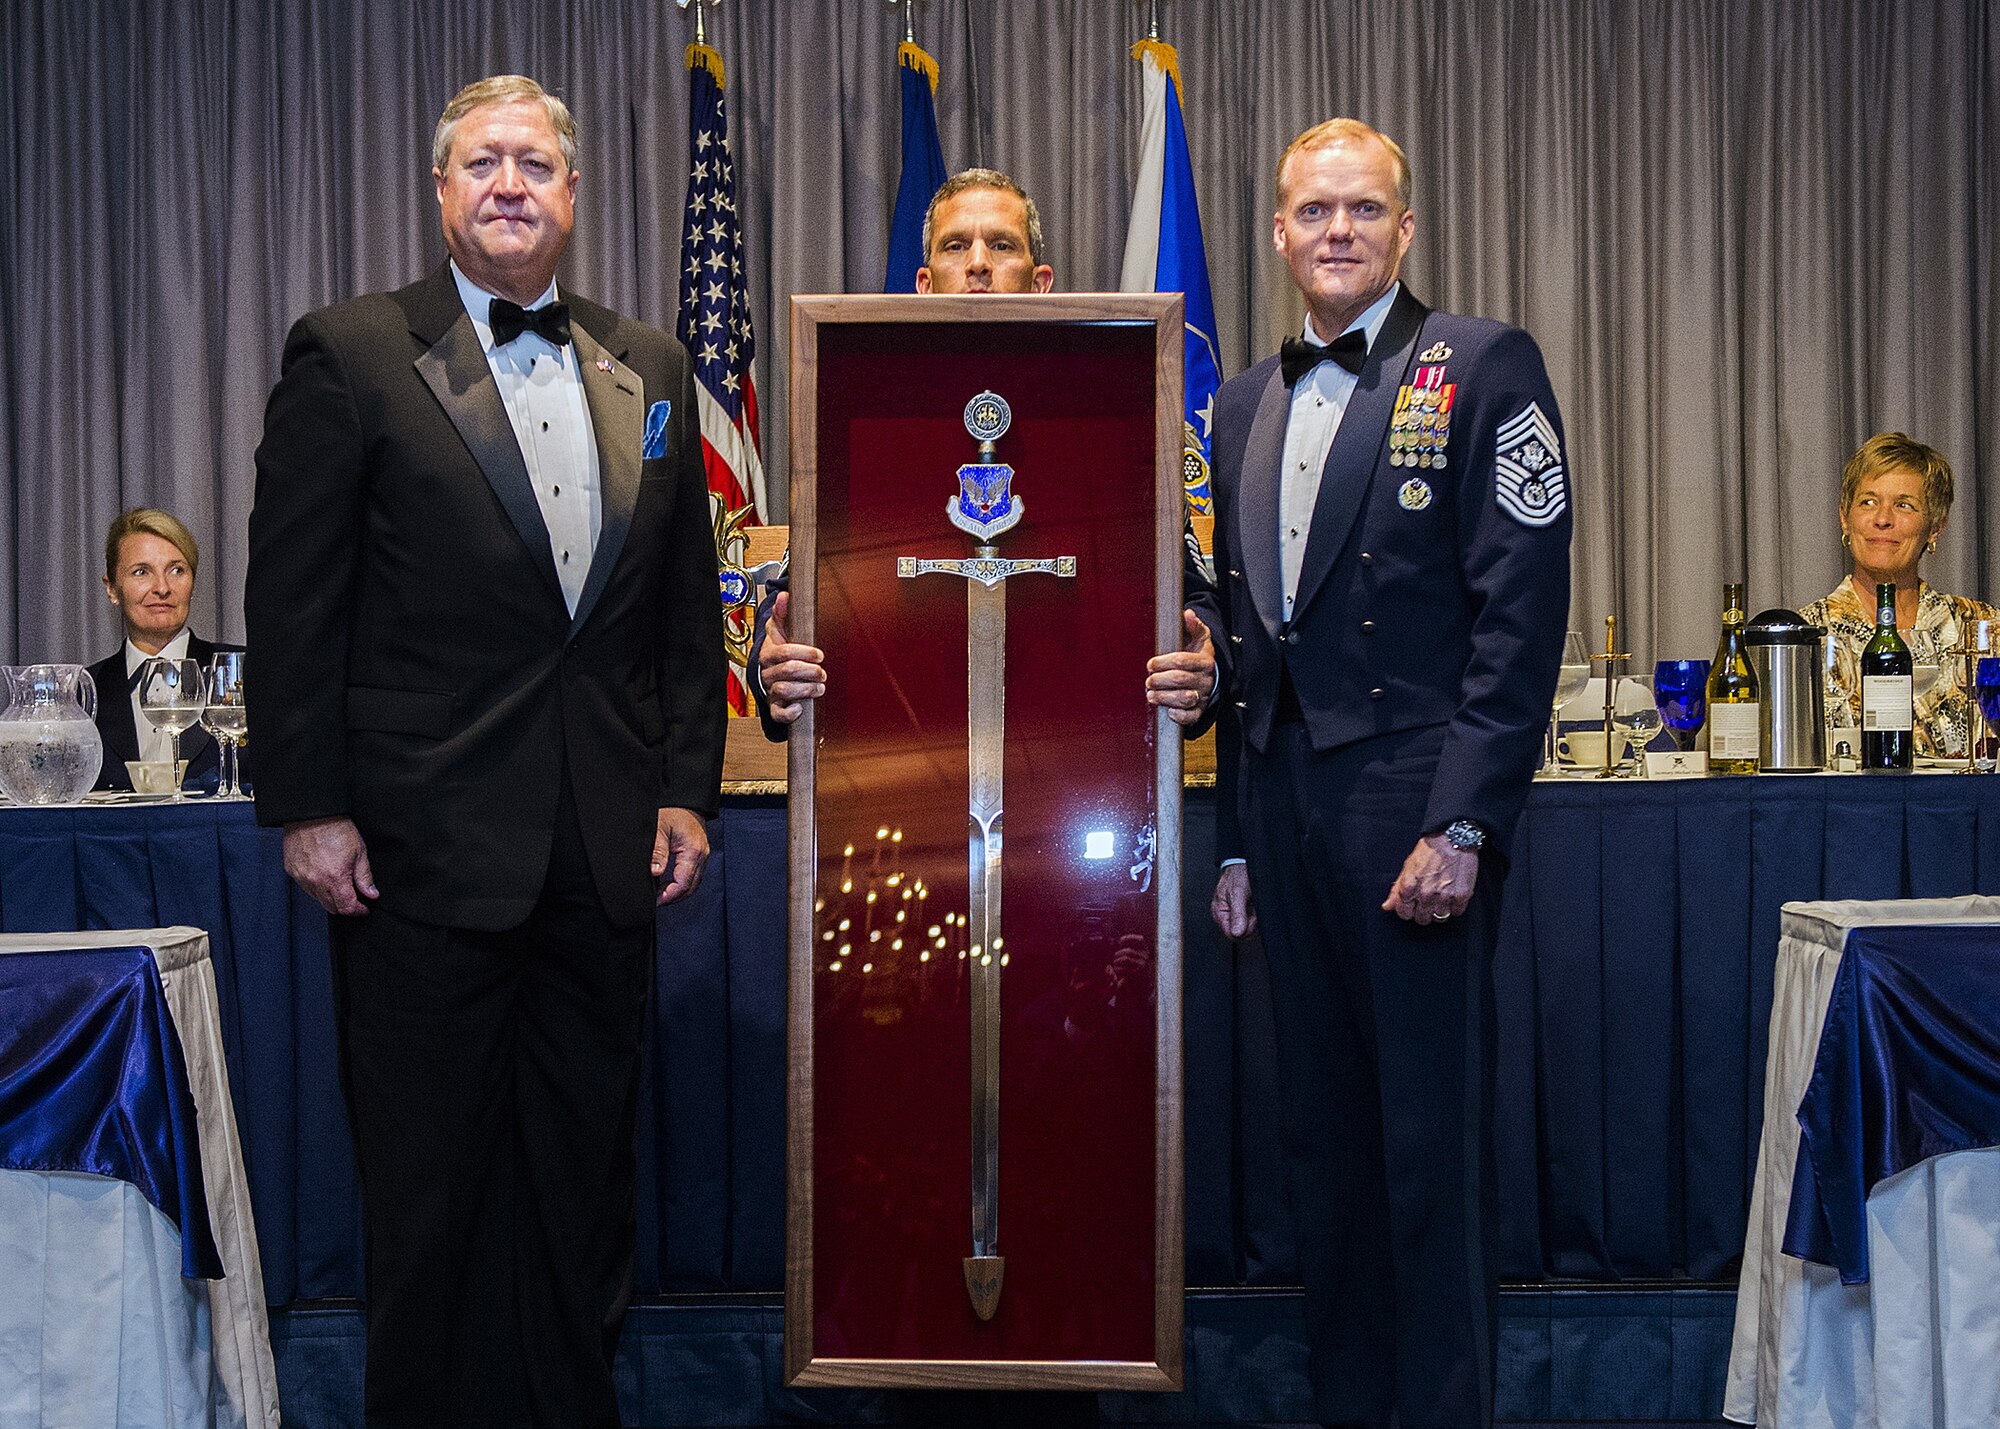 Chief Master Sgt.of the Air Force James Cody inducts the former Secretary of the Air Force Michael Donley into the Order of the Sword during a ceremony on Joint Base Anacostia Bolling, Washington, D.C. on Sept. 13, 2013.